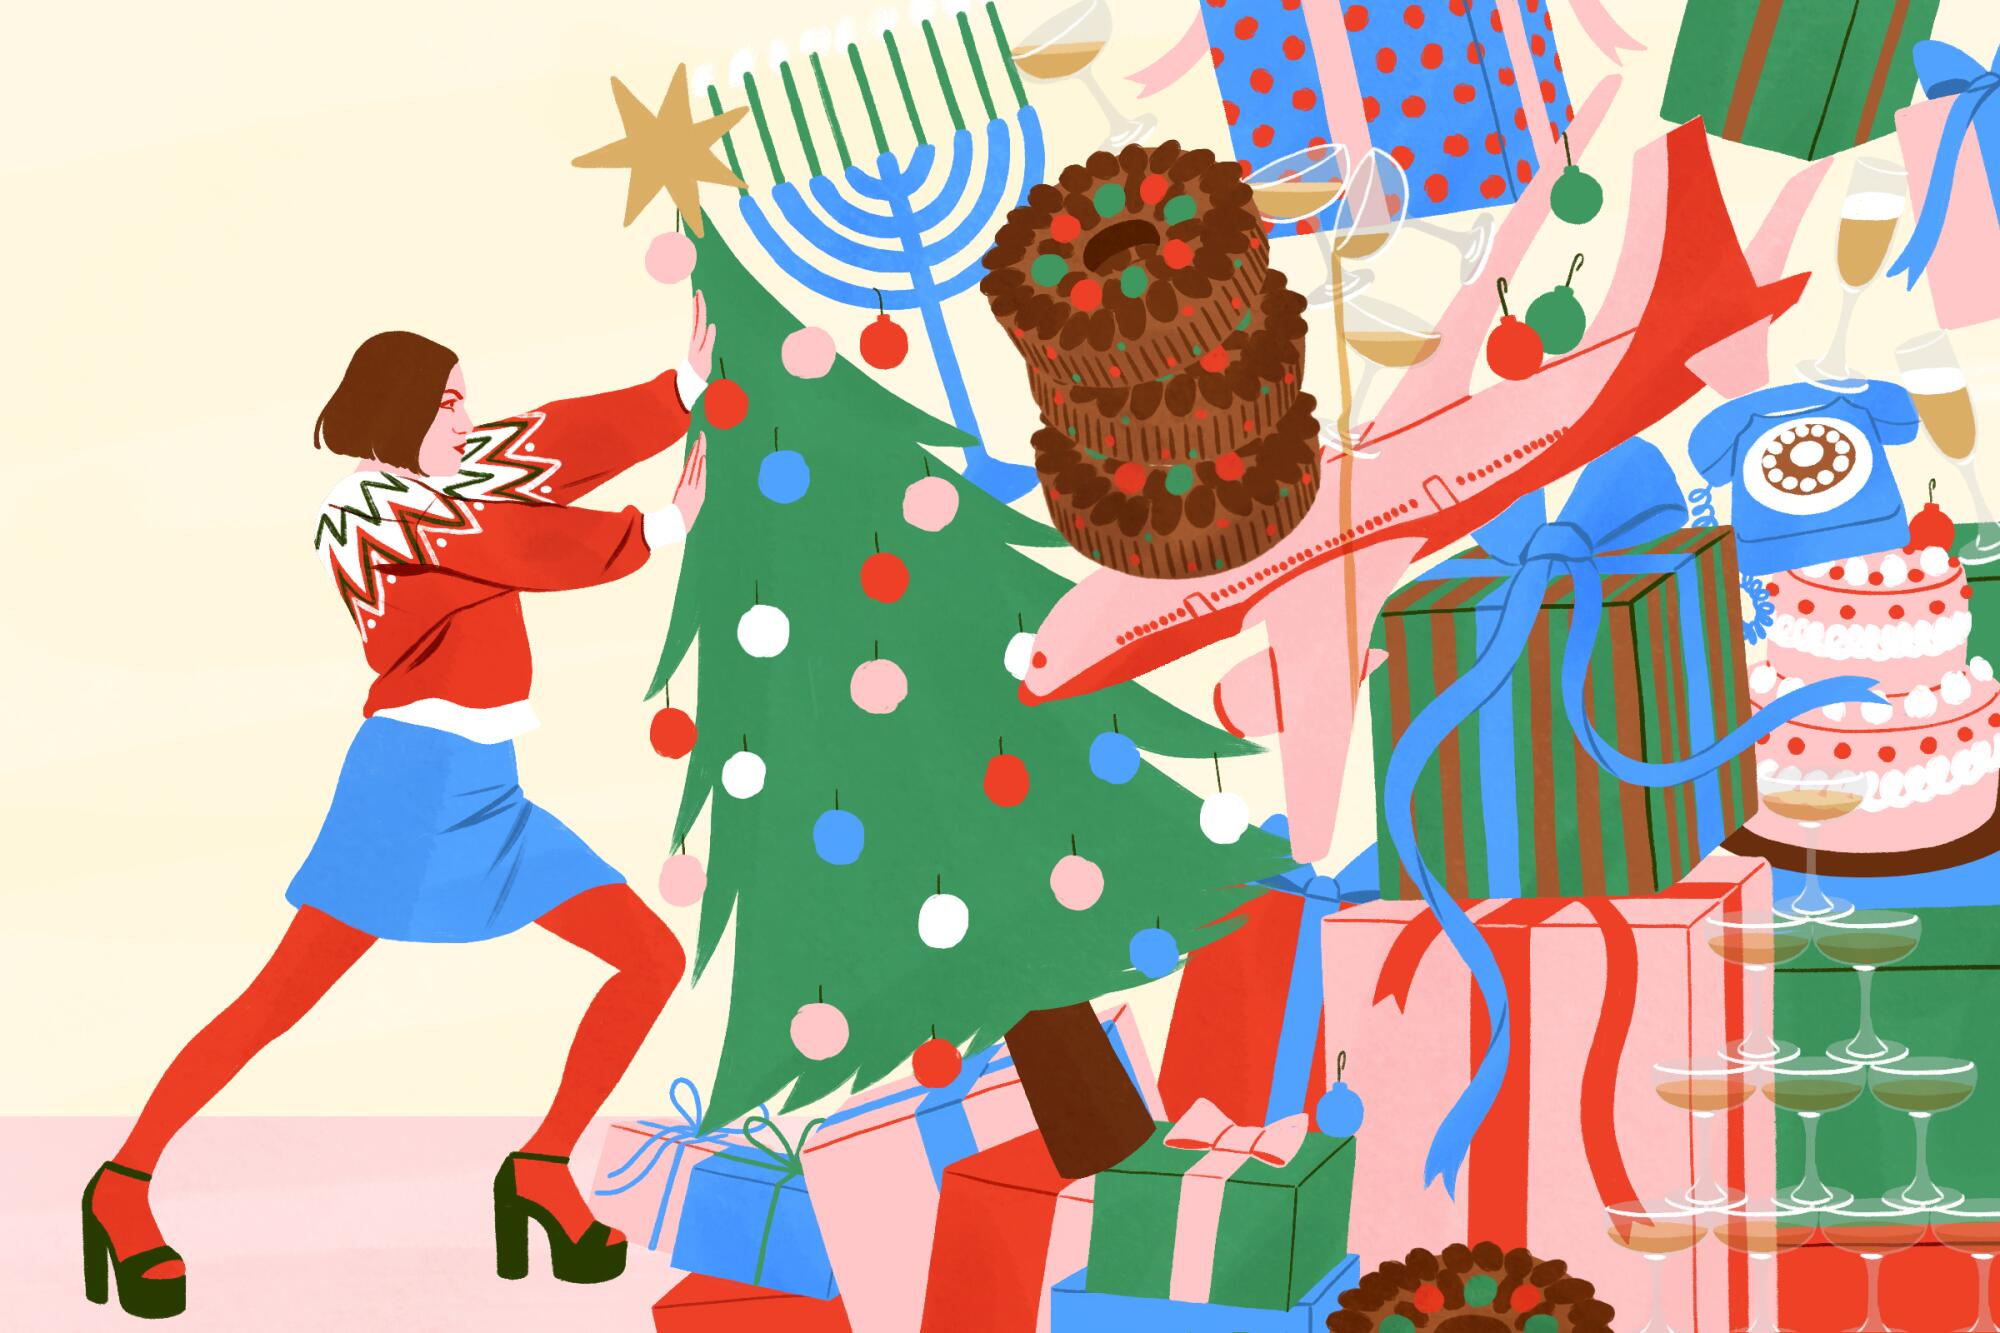 Illustration of a woman pushing against holiday symbols including Christmas tree, menorah, wrapped gifts, cakes, glasses